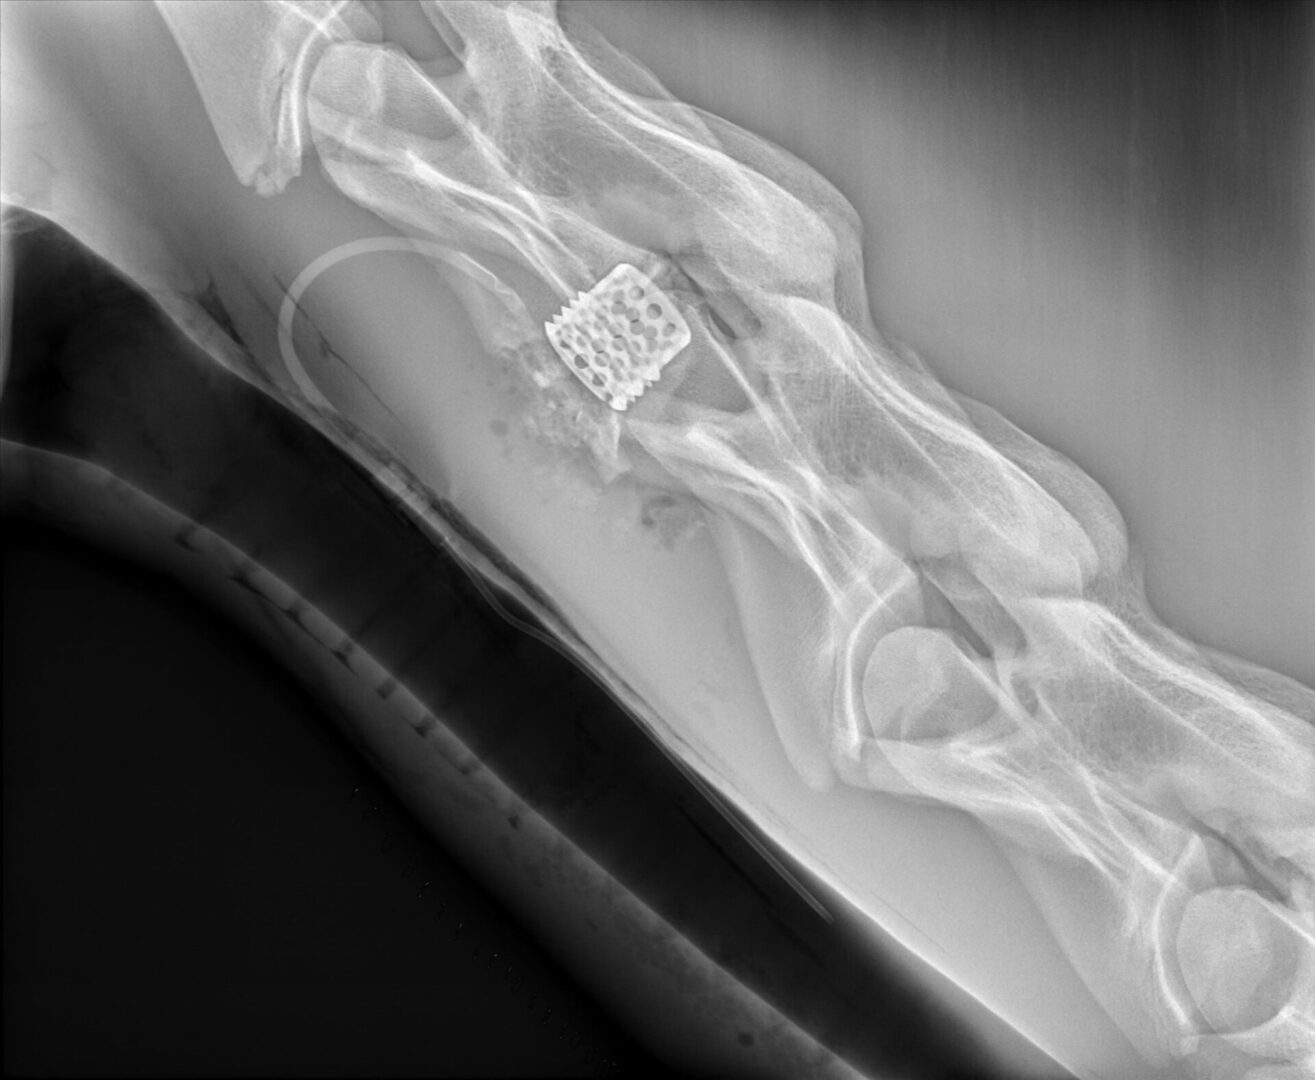 A black and white photo of an x-ray showing the bottom part of a wrist.